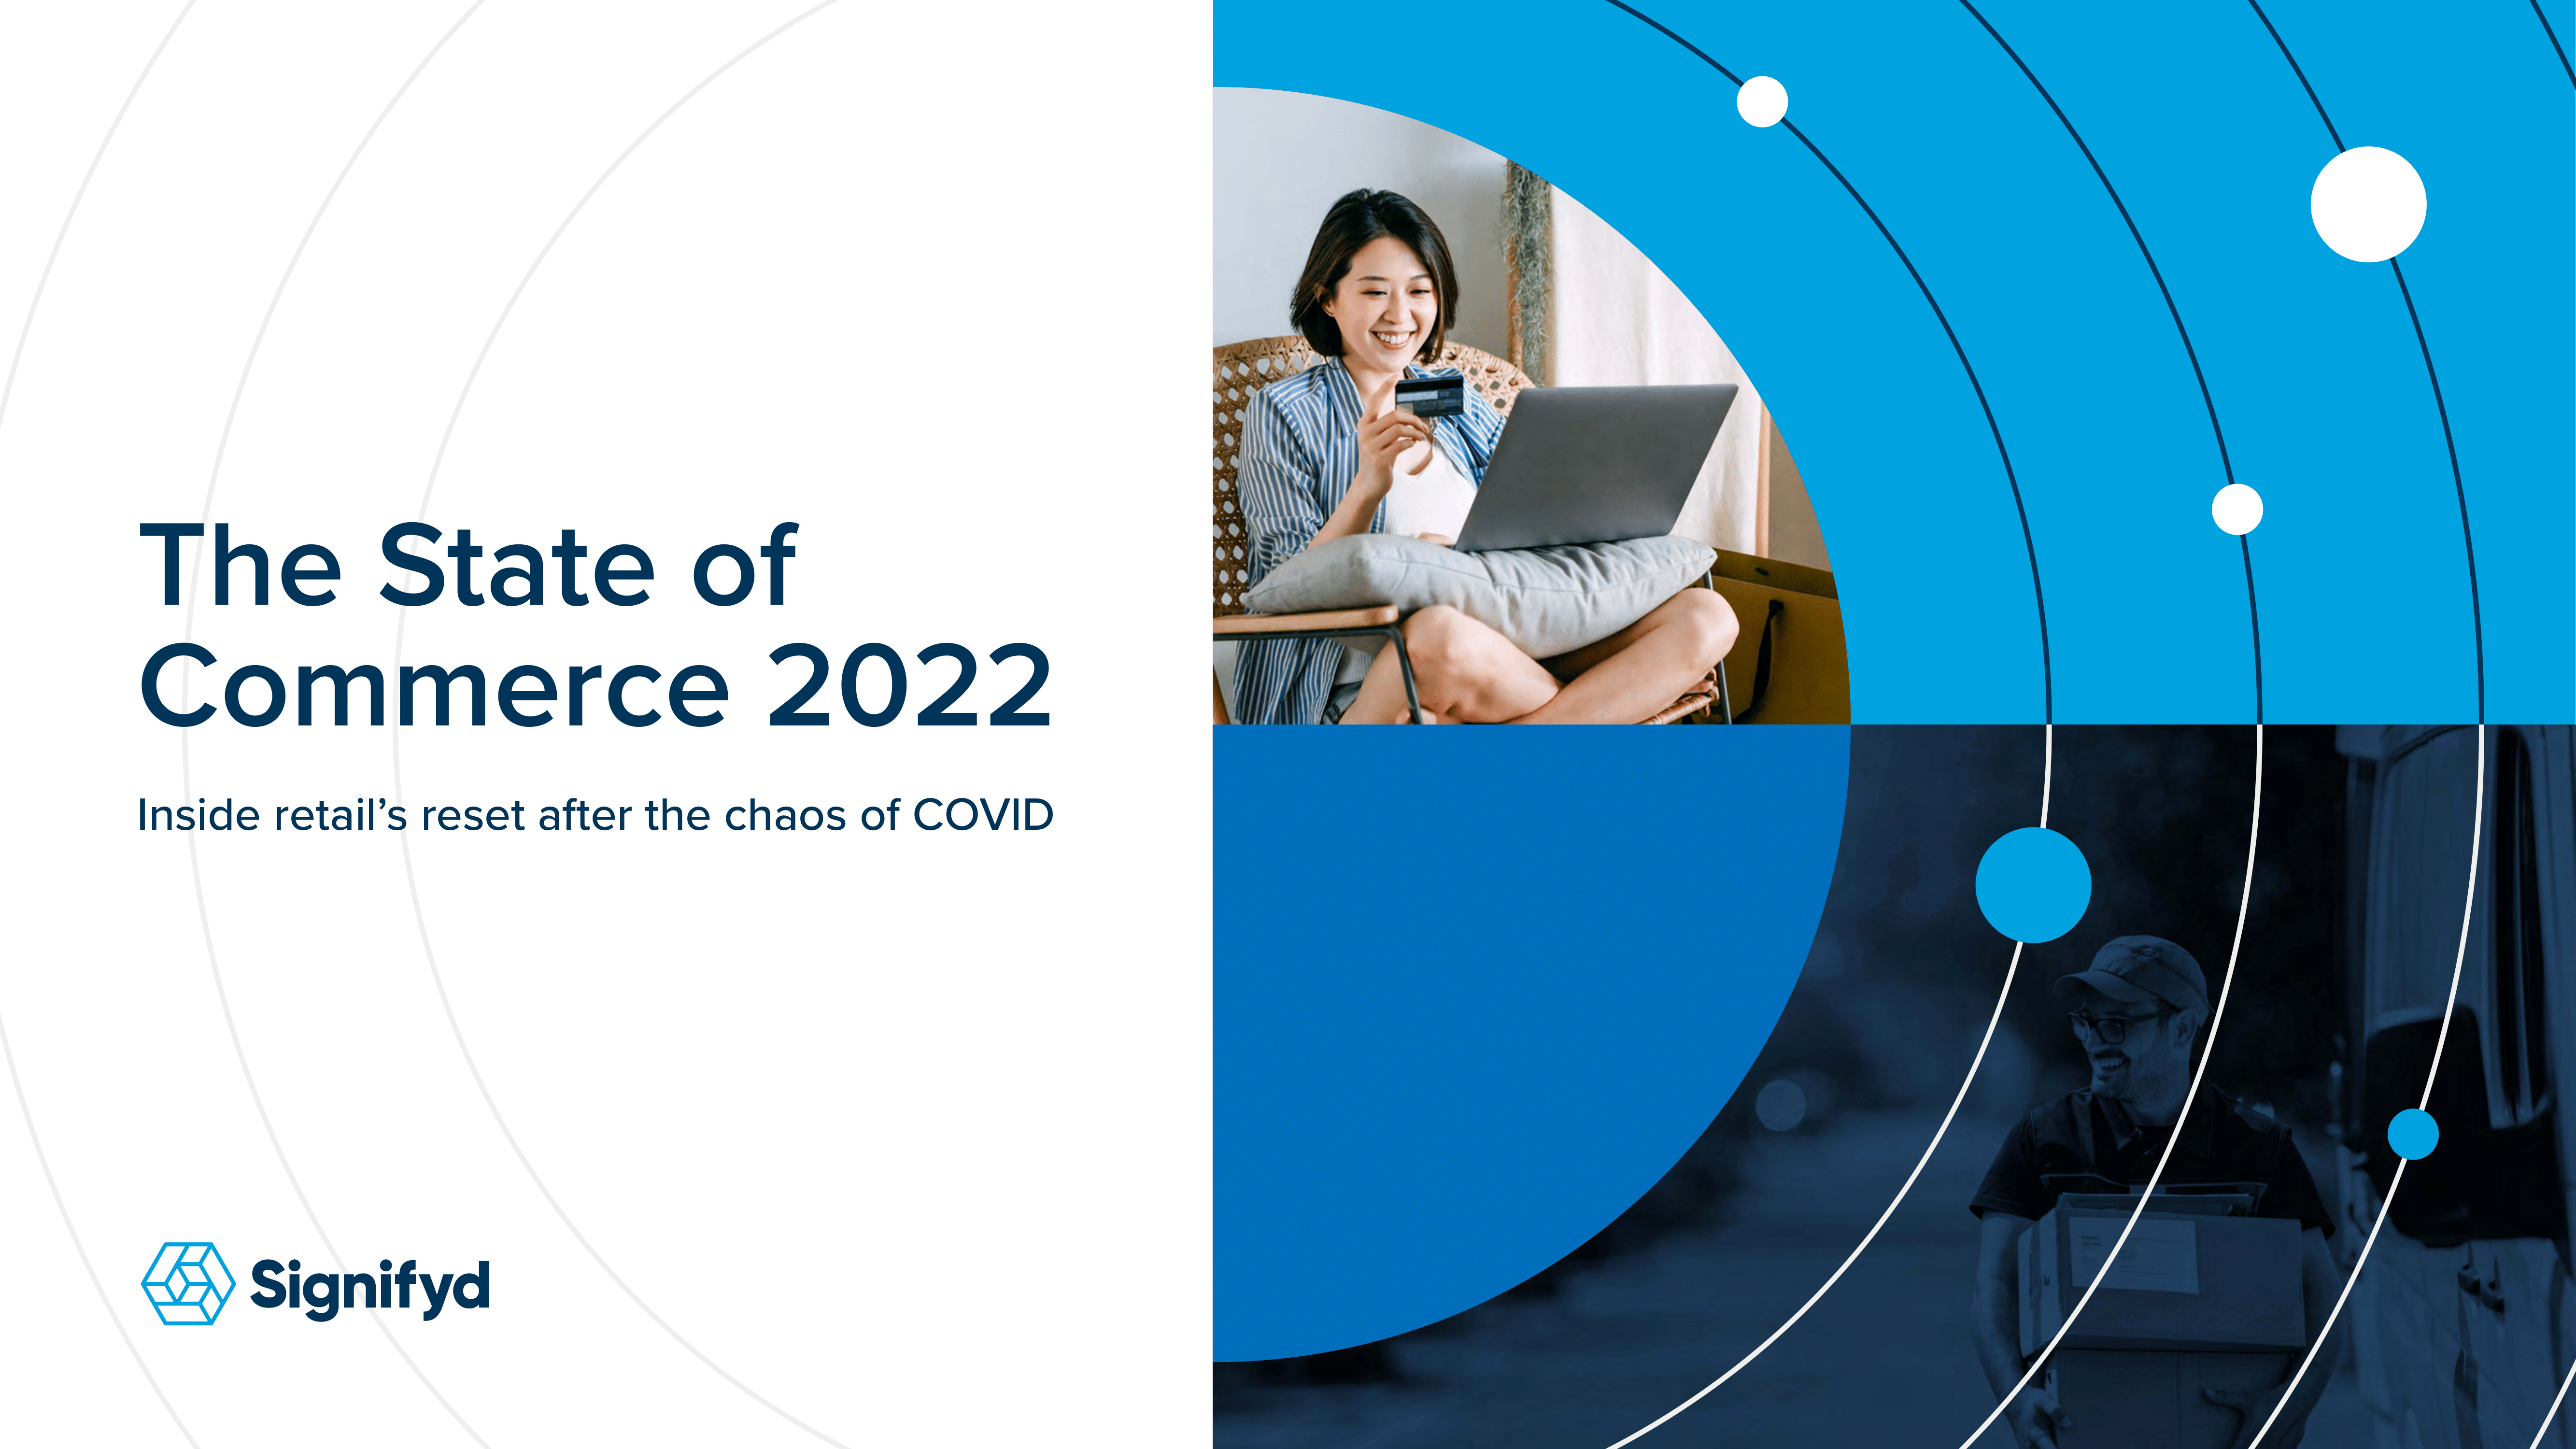 The State of Commerce 2022